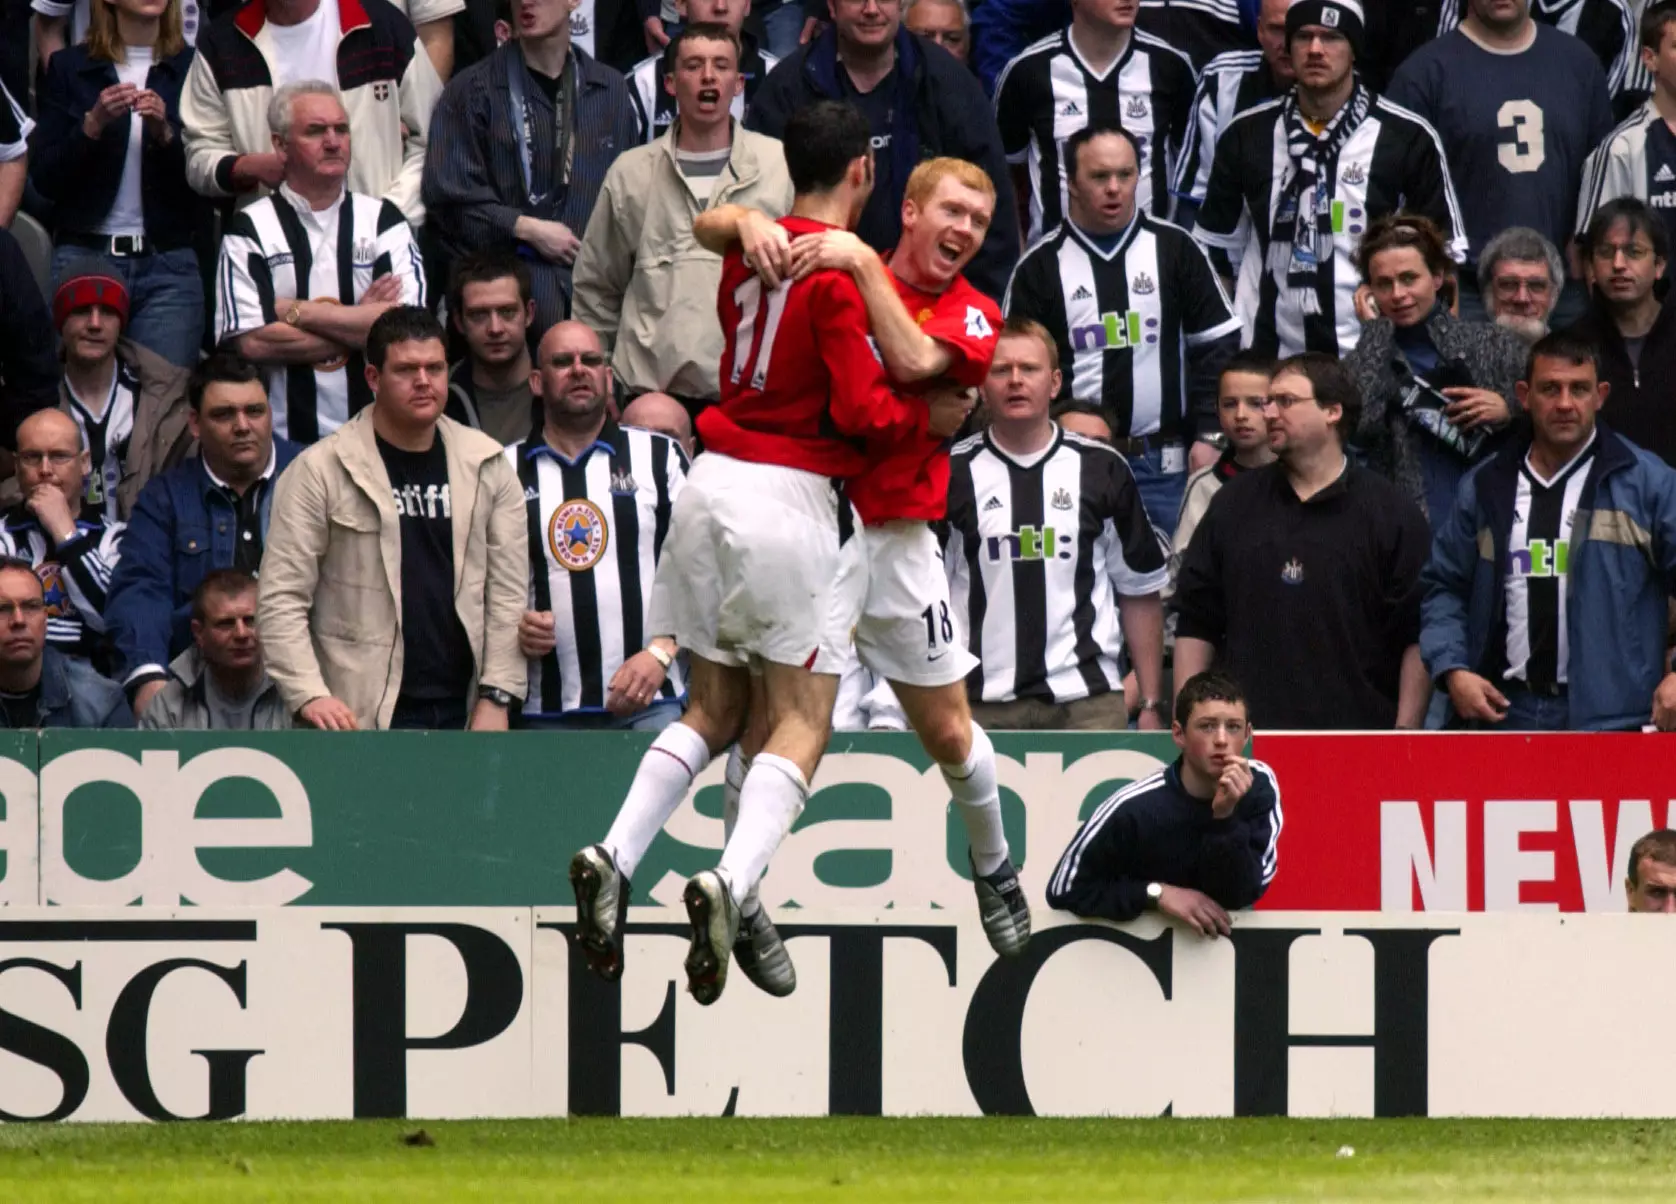 Scholes and Giggs celebrate scoring a goal. Image: PA